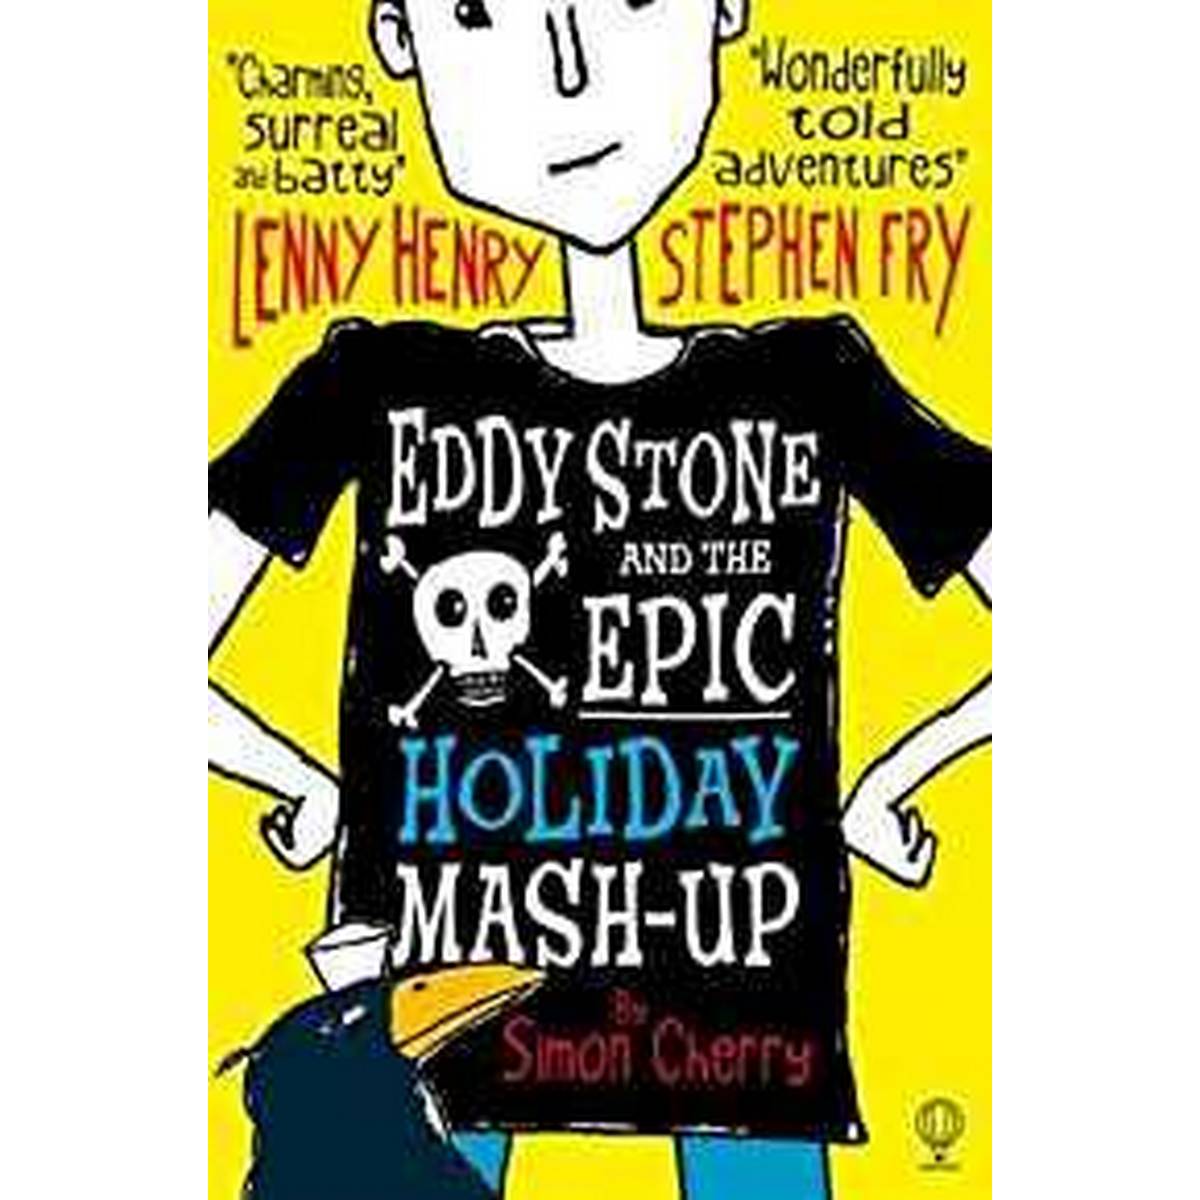 Eddy Stone and the Epic Holiday Mash-Up